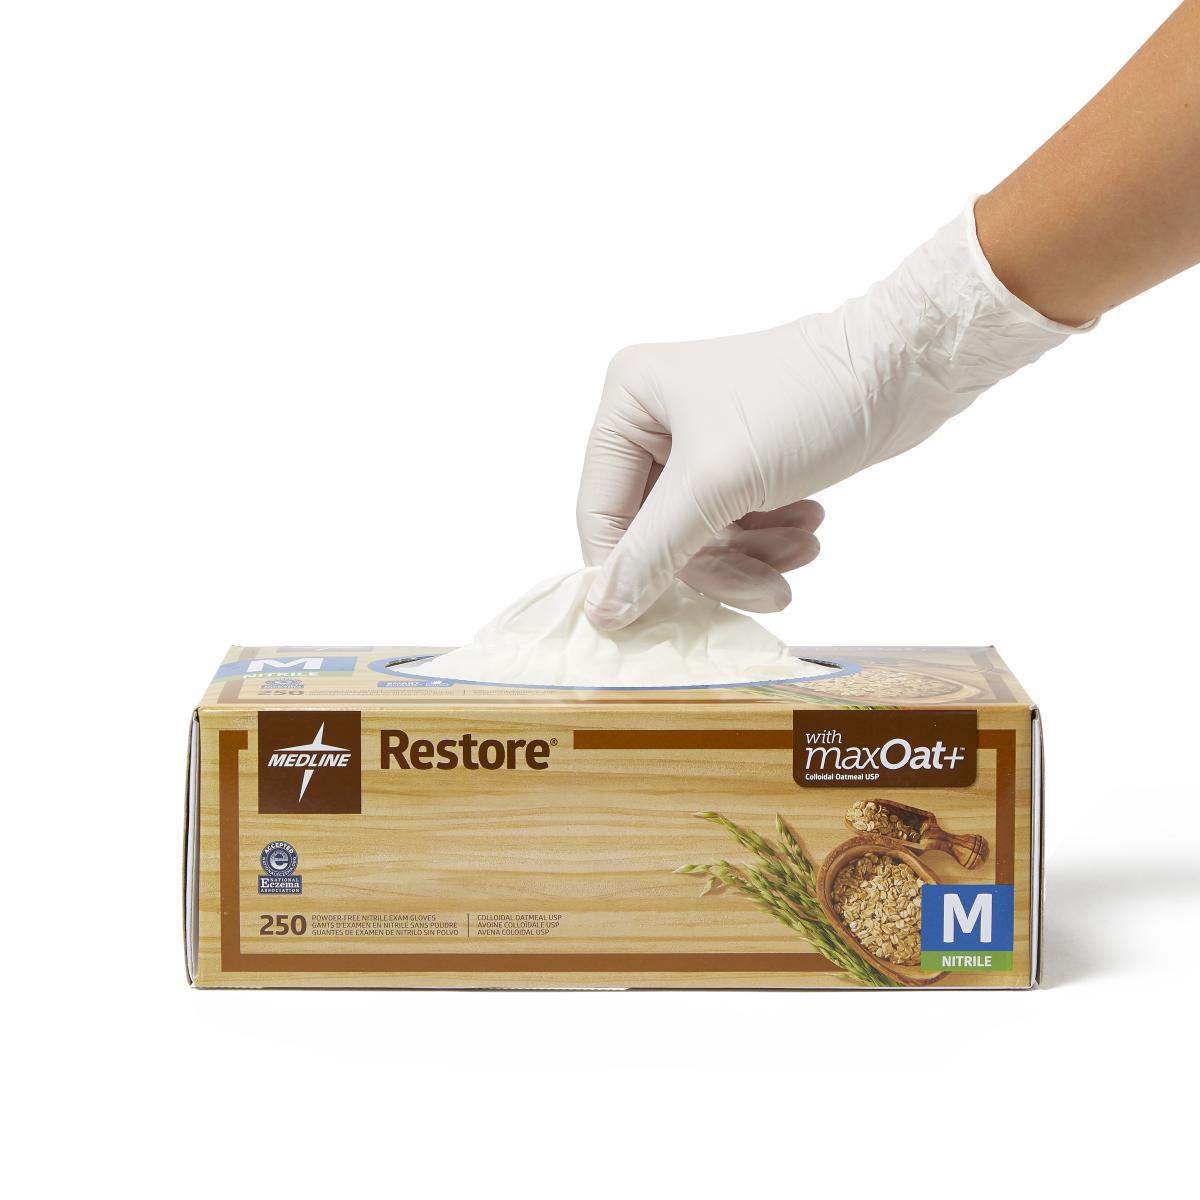 Restore® Powder-Free Nitrile Gloves with maxOat+ colloidal oatmeal